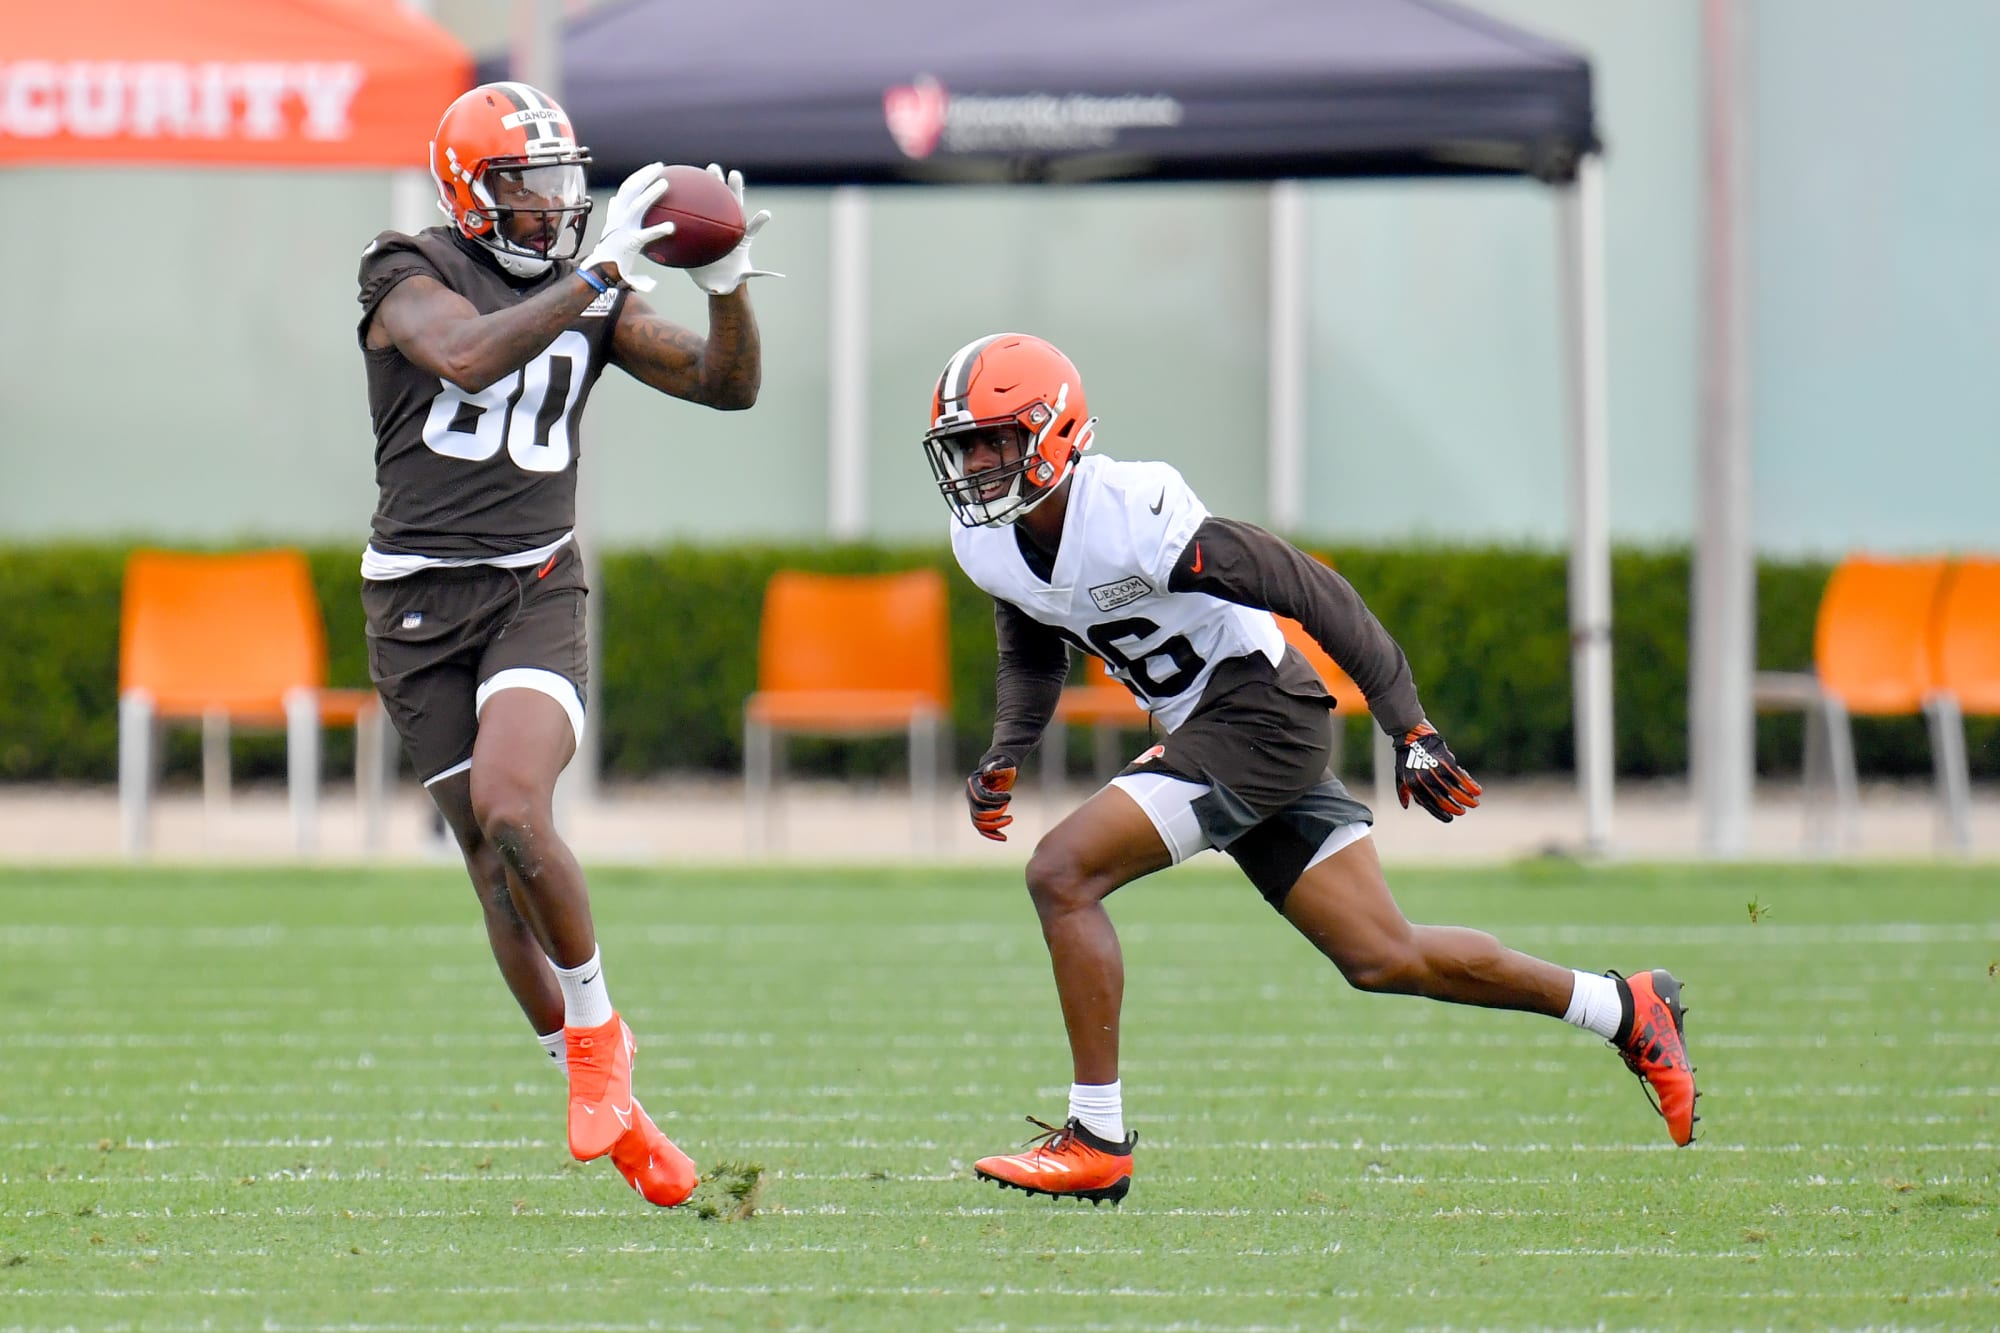 Jarvis Landry being healthy will be critical to Browns turnaround